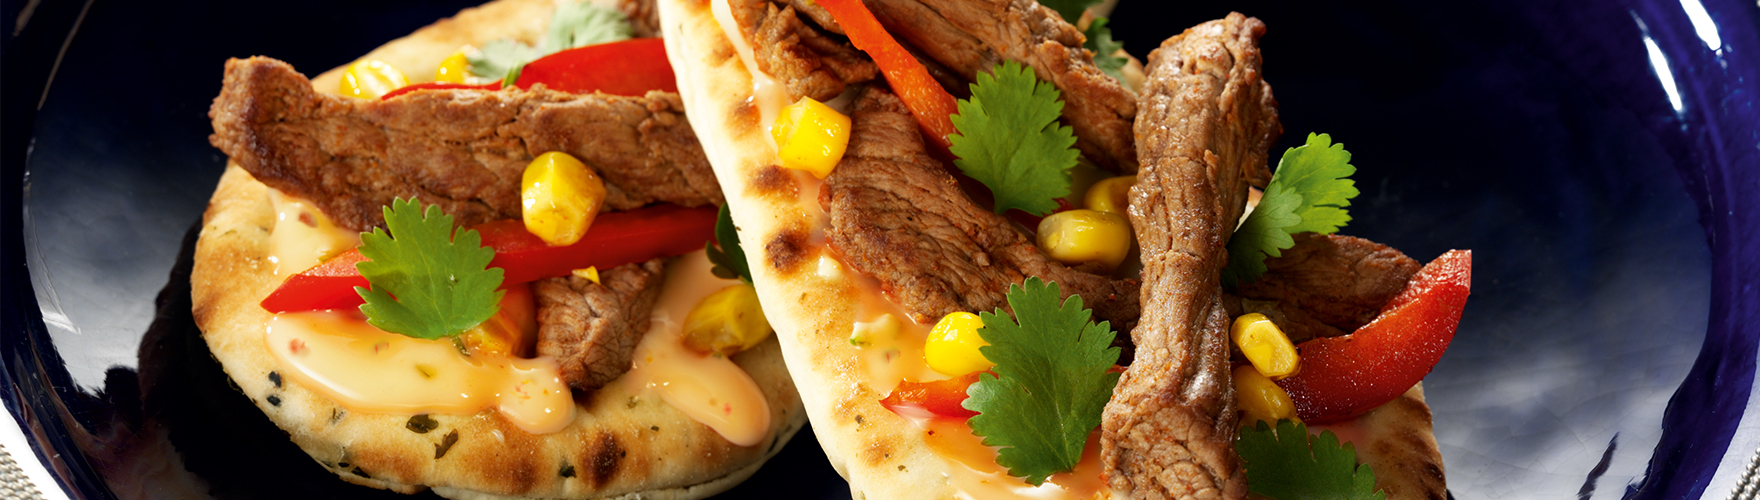 Naan sandwich with sliced beef, sweet corn and peppers